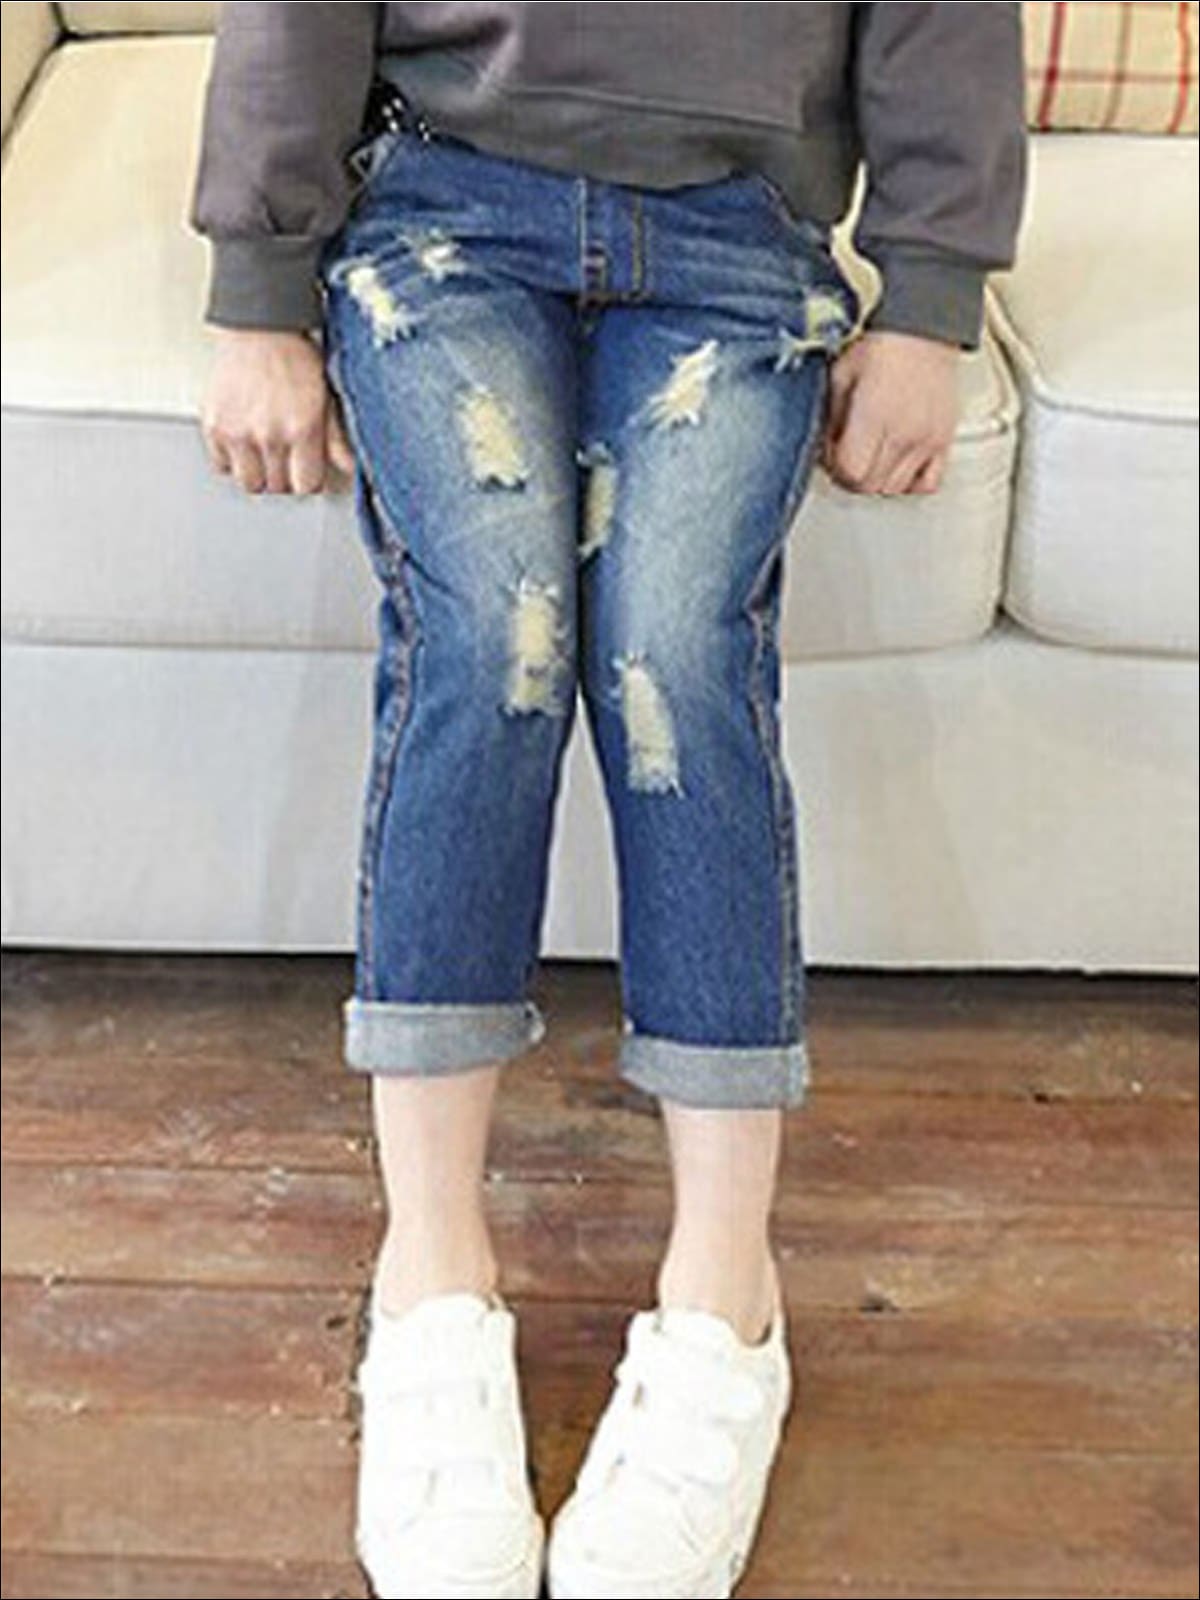 Kids Denim Clothes | Distressed Faded Cuffed Jeans | Mia Belle Girls